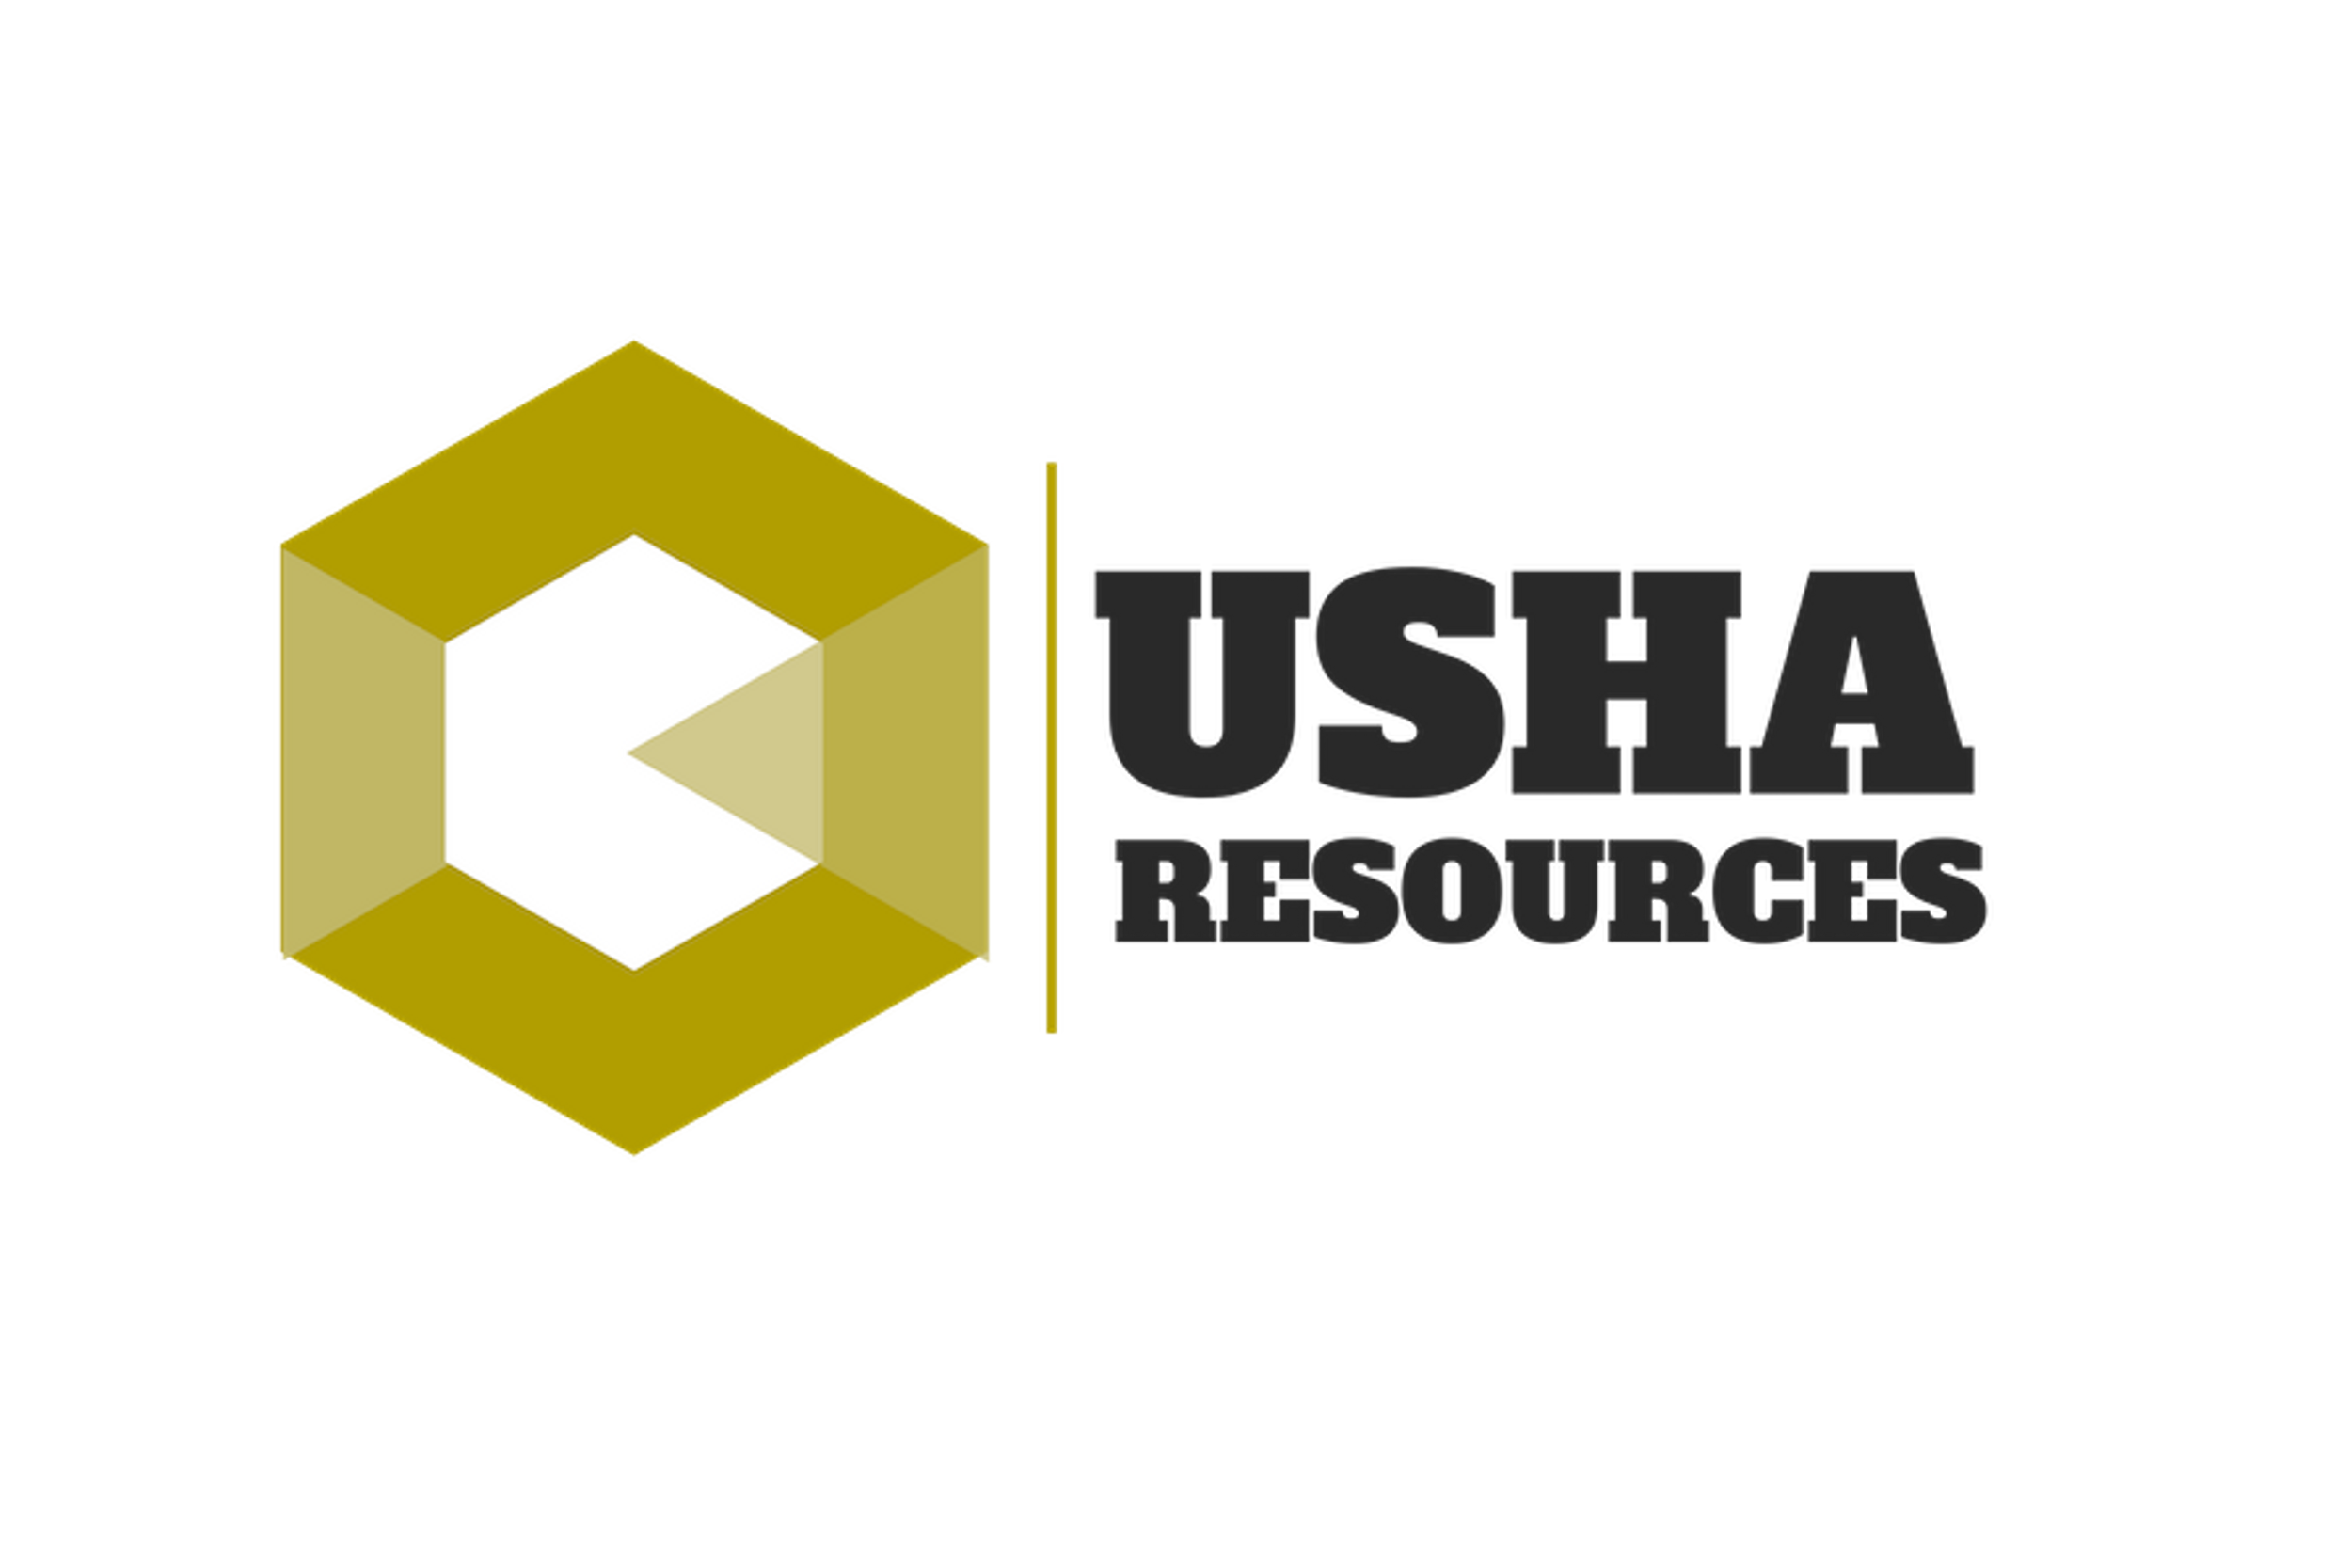 Usha Resources Announces Creation of Formation Metals Spinout through Signing of Arrangement Agreement